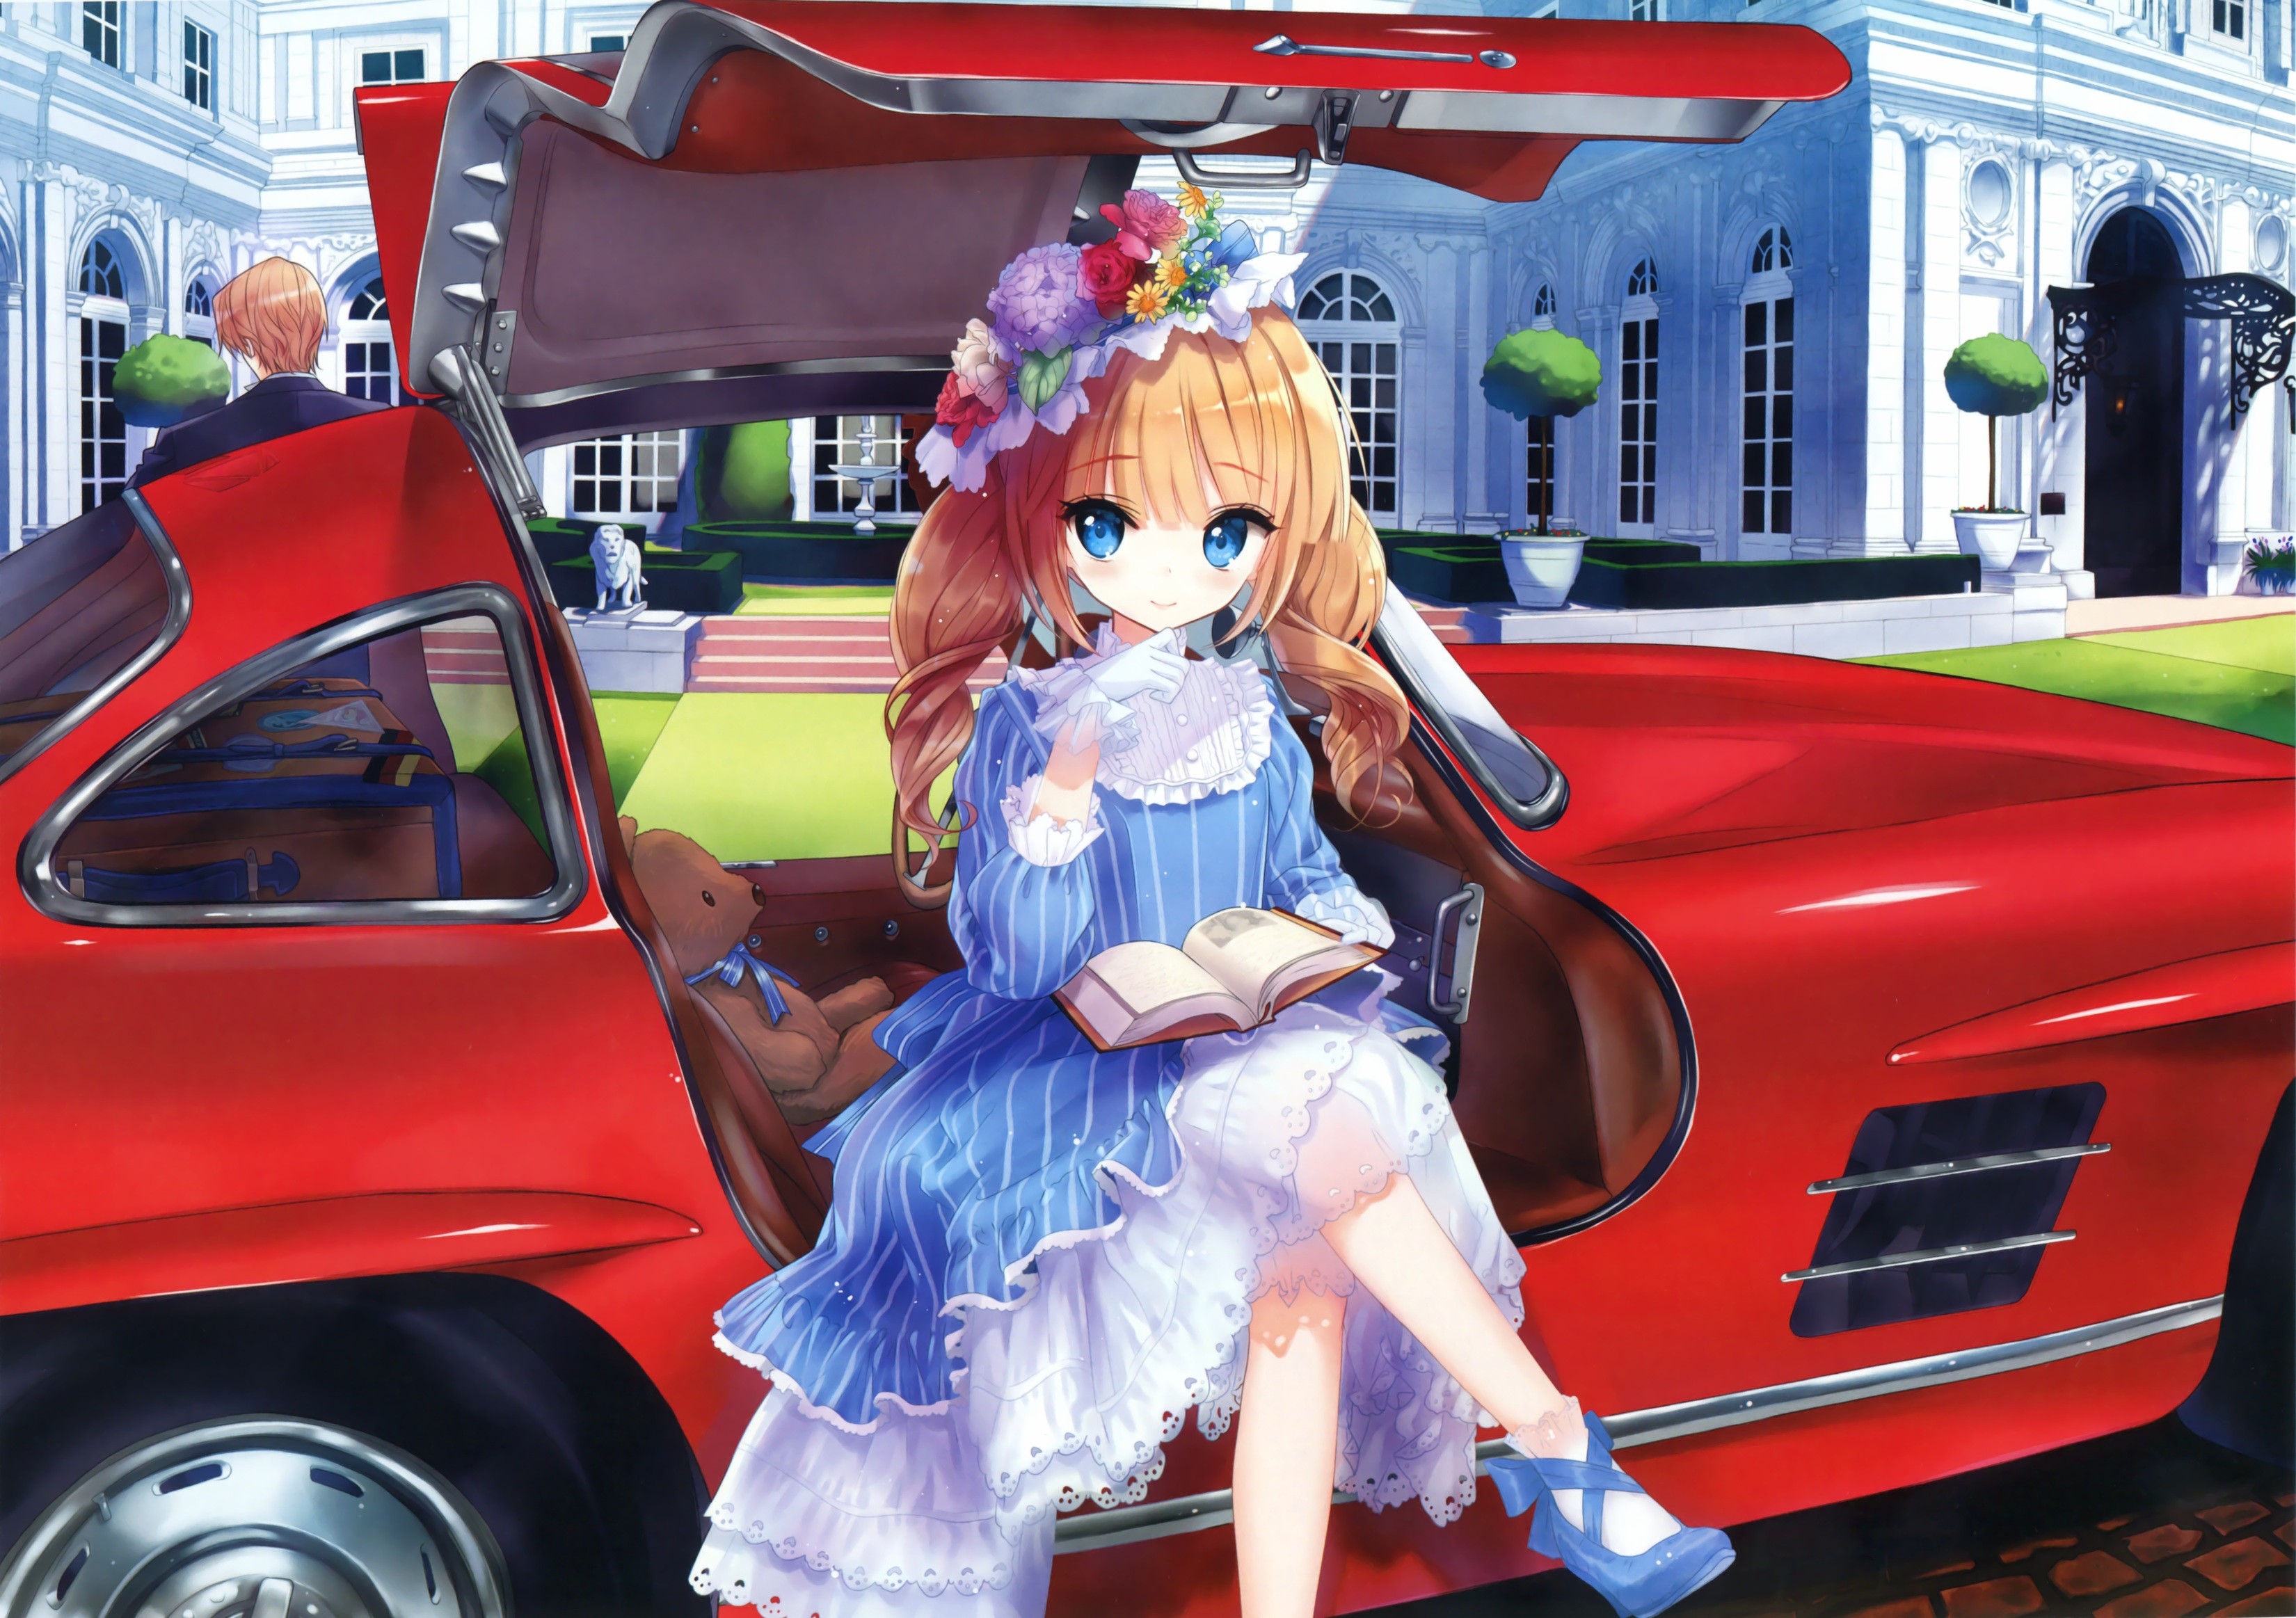 Anime 3300x2326 anime anime girls women with cars red cars vehicle blonde blue eyes dress books colorful